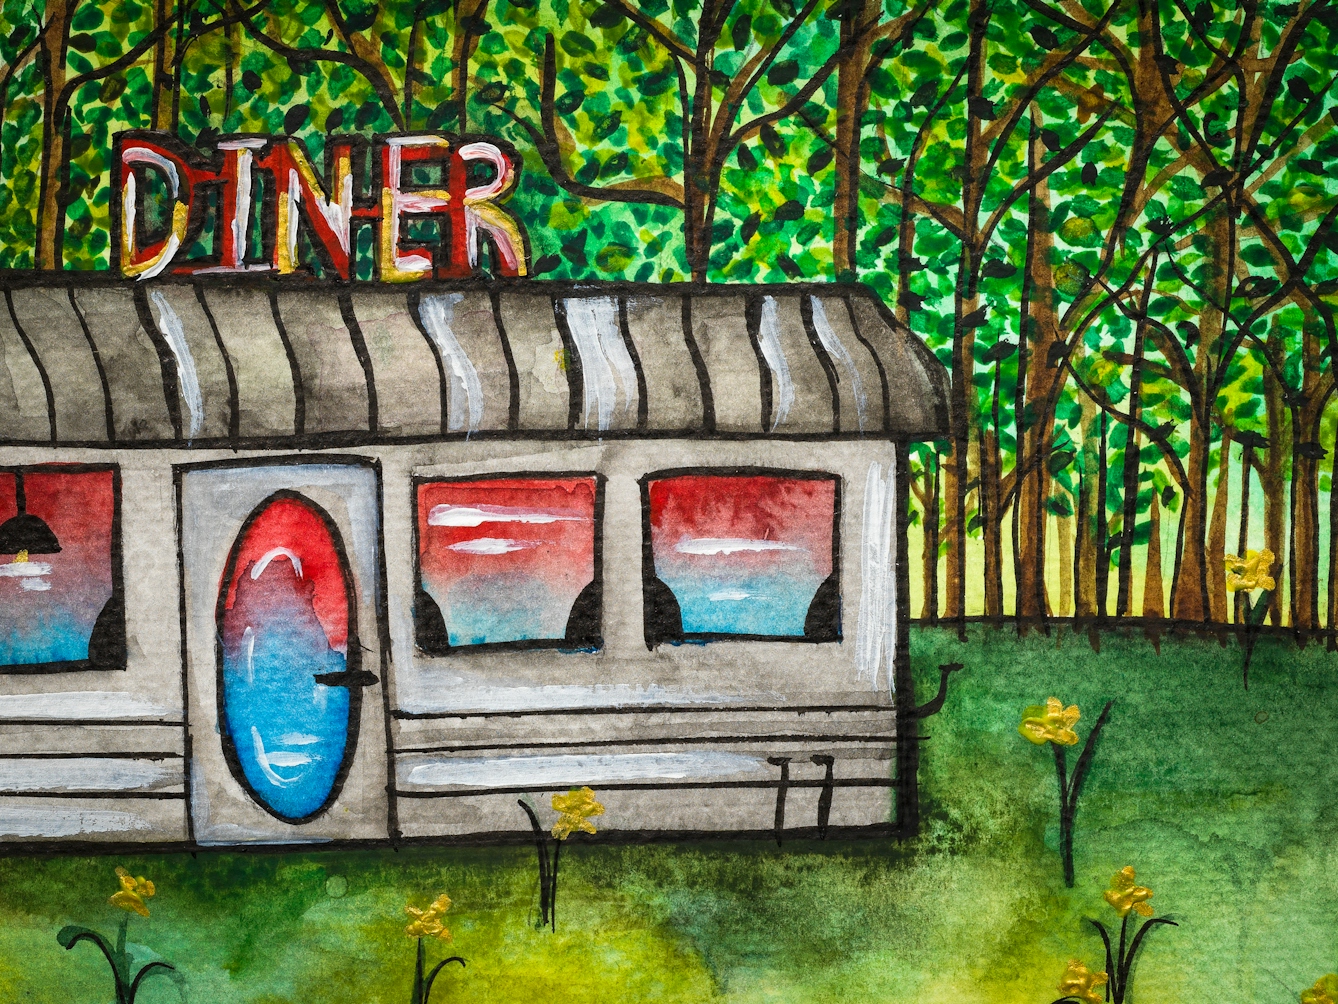 Detail from a larger colourful artwork. The artwork shows a grey building with a sign reading 'Diner' attached to the roof. To the right there is a woodland and the grass is green with flowers growing.